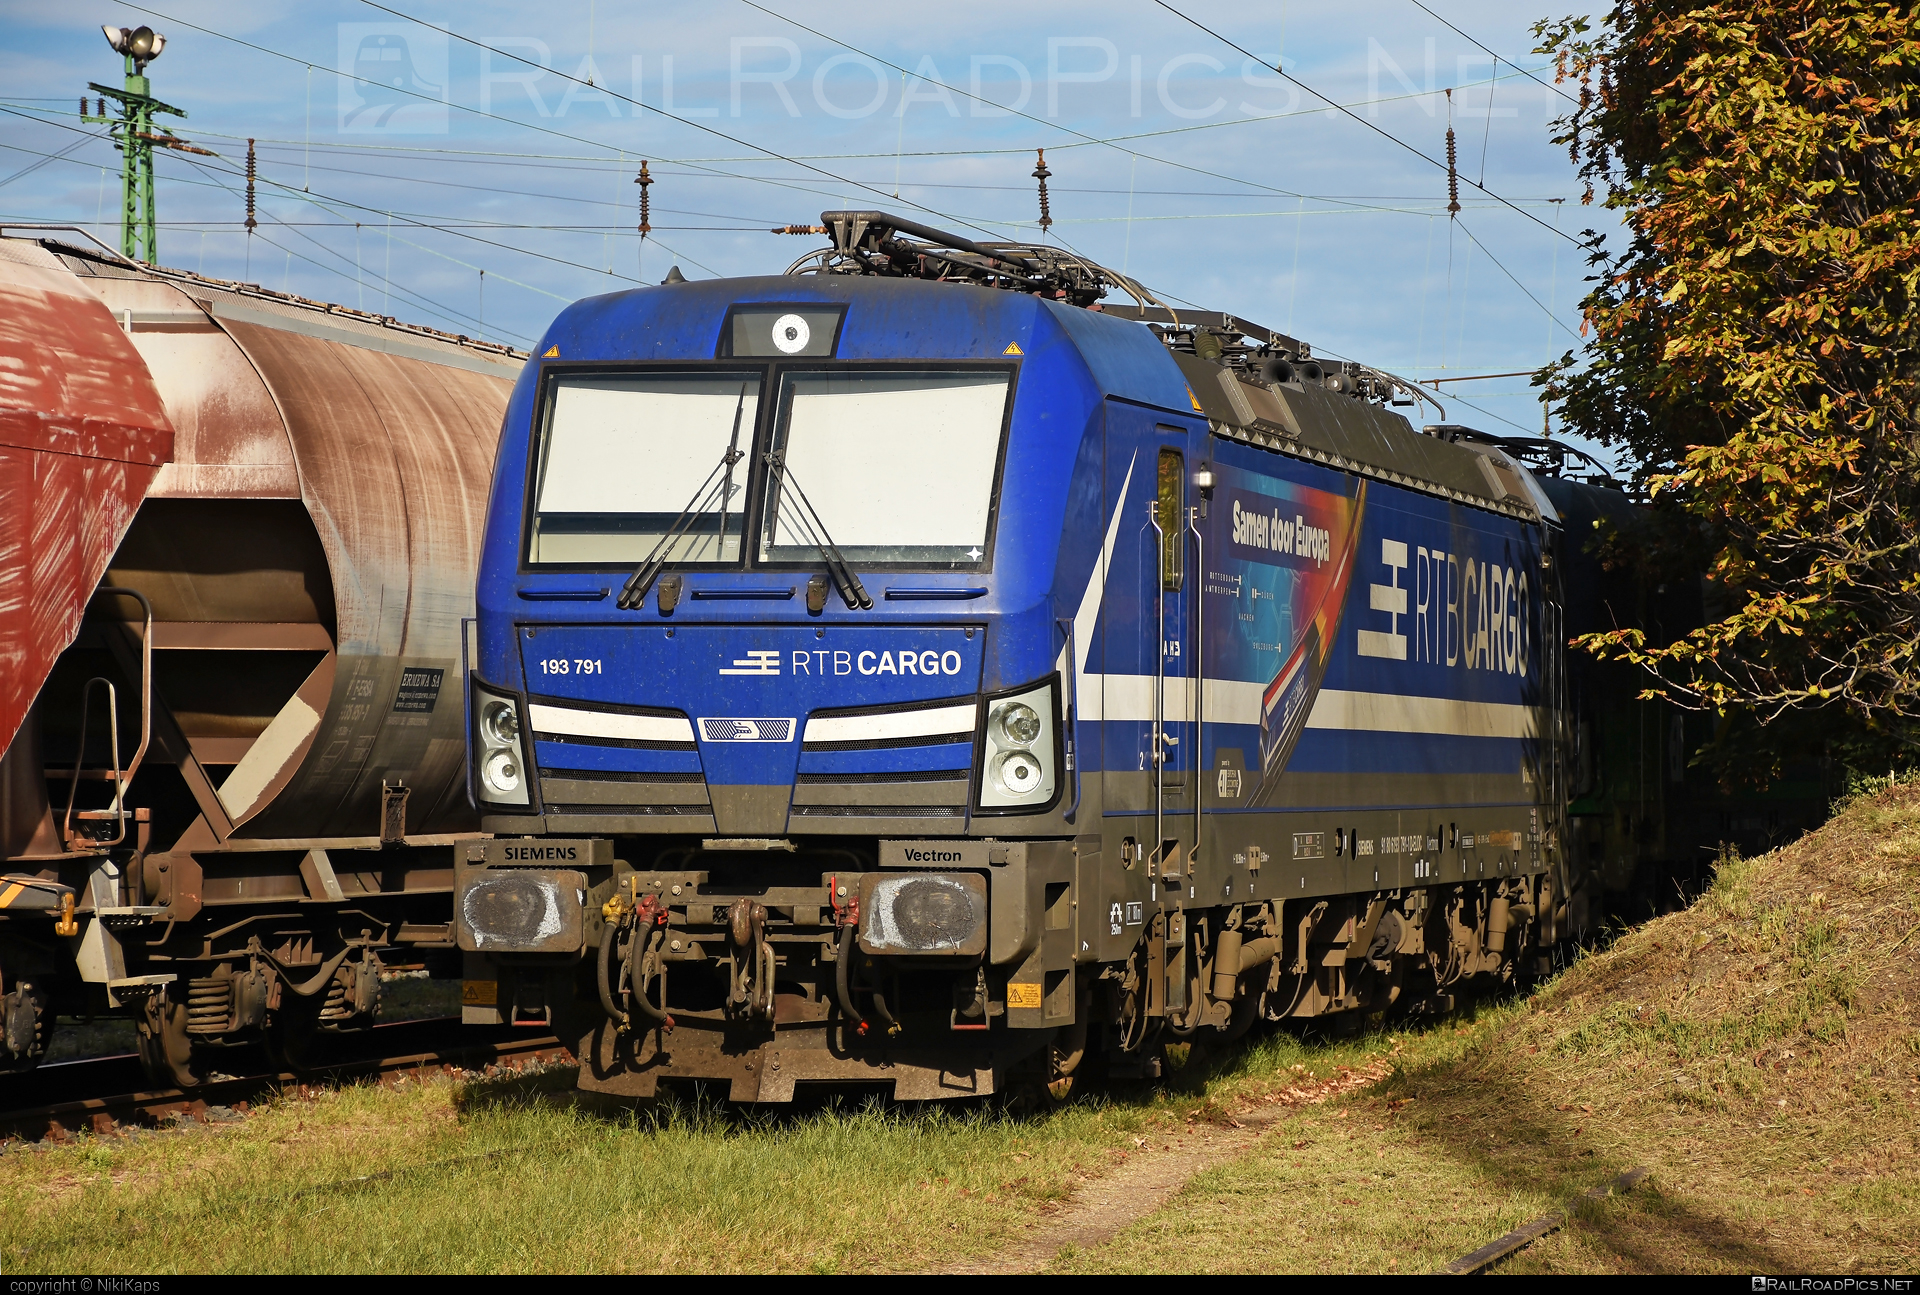 Siemens Vectron MS - 193 791 operated by RTB Cargo GmbH #ell #ellgermany #eloc #europeanlocomotiveleasing #rtb #rtbcargo #siemens #siemensVectron #siemensVectronMS #vectron #vectronMS